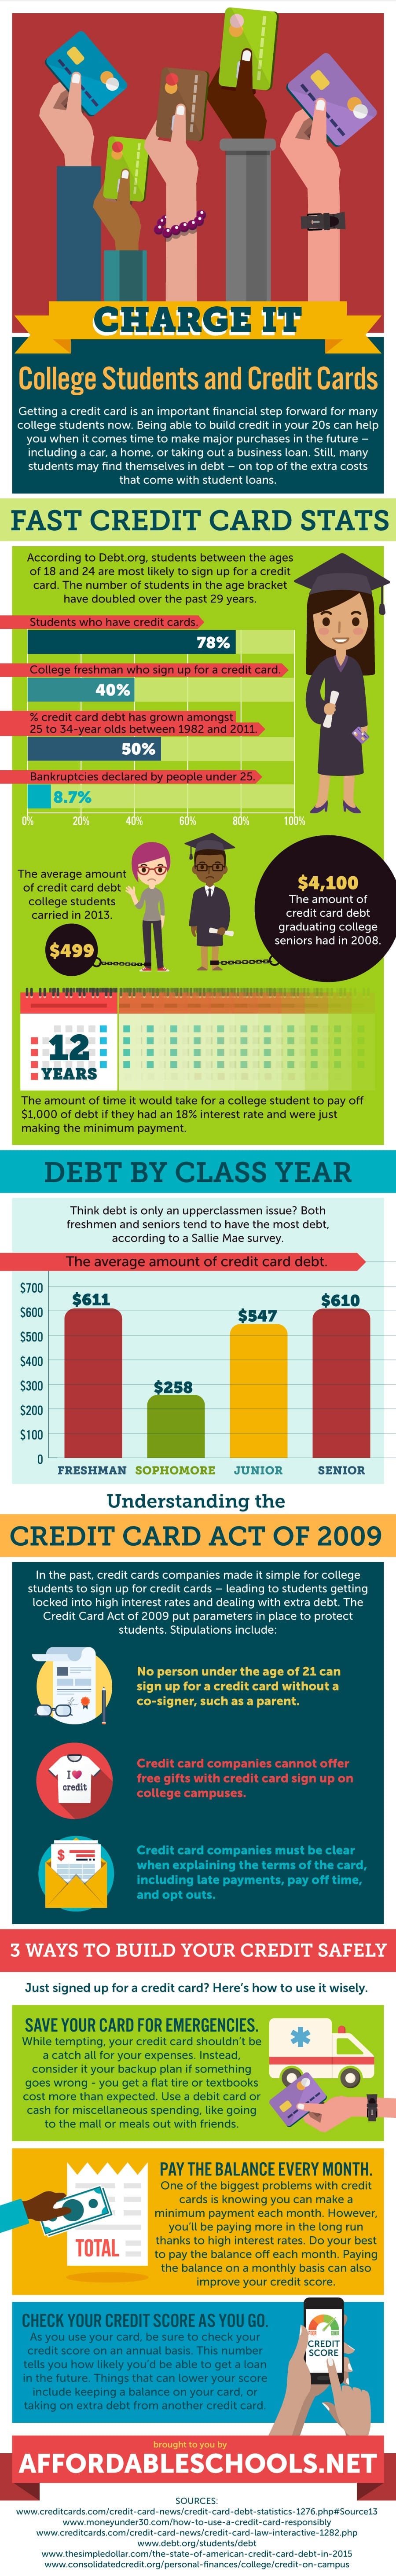 college students and credit cards statistics